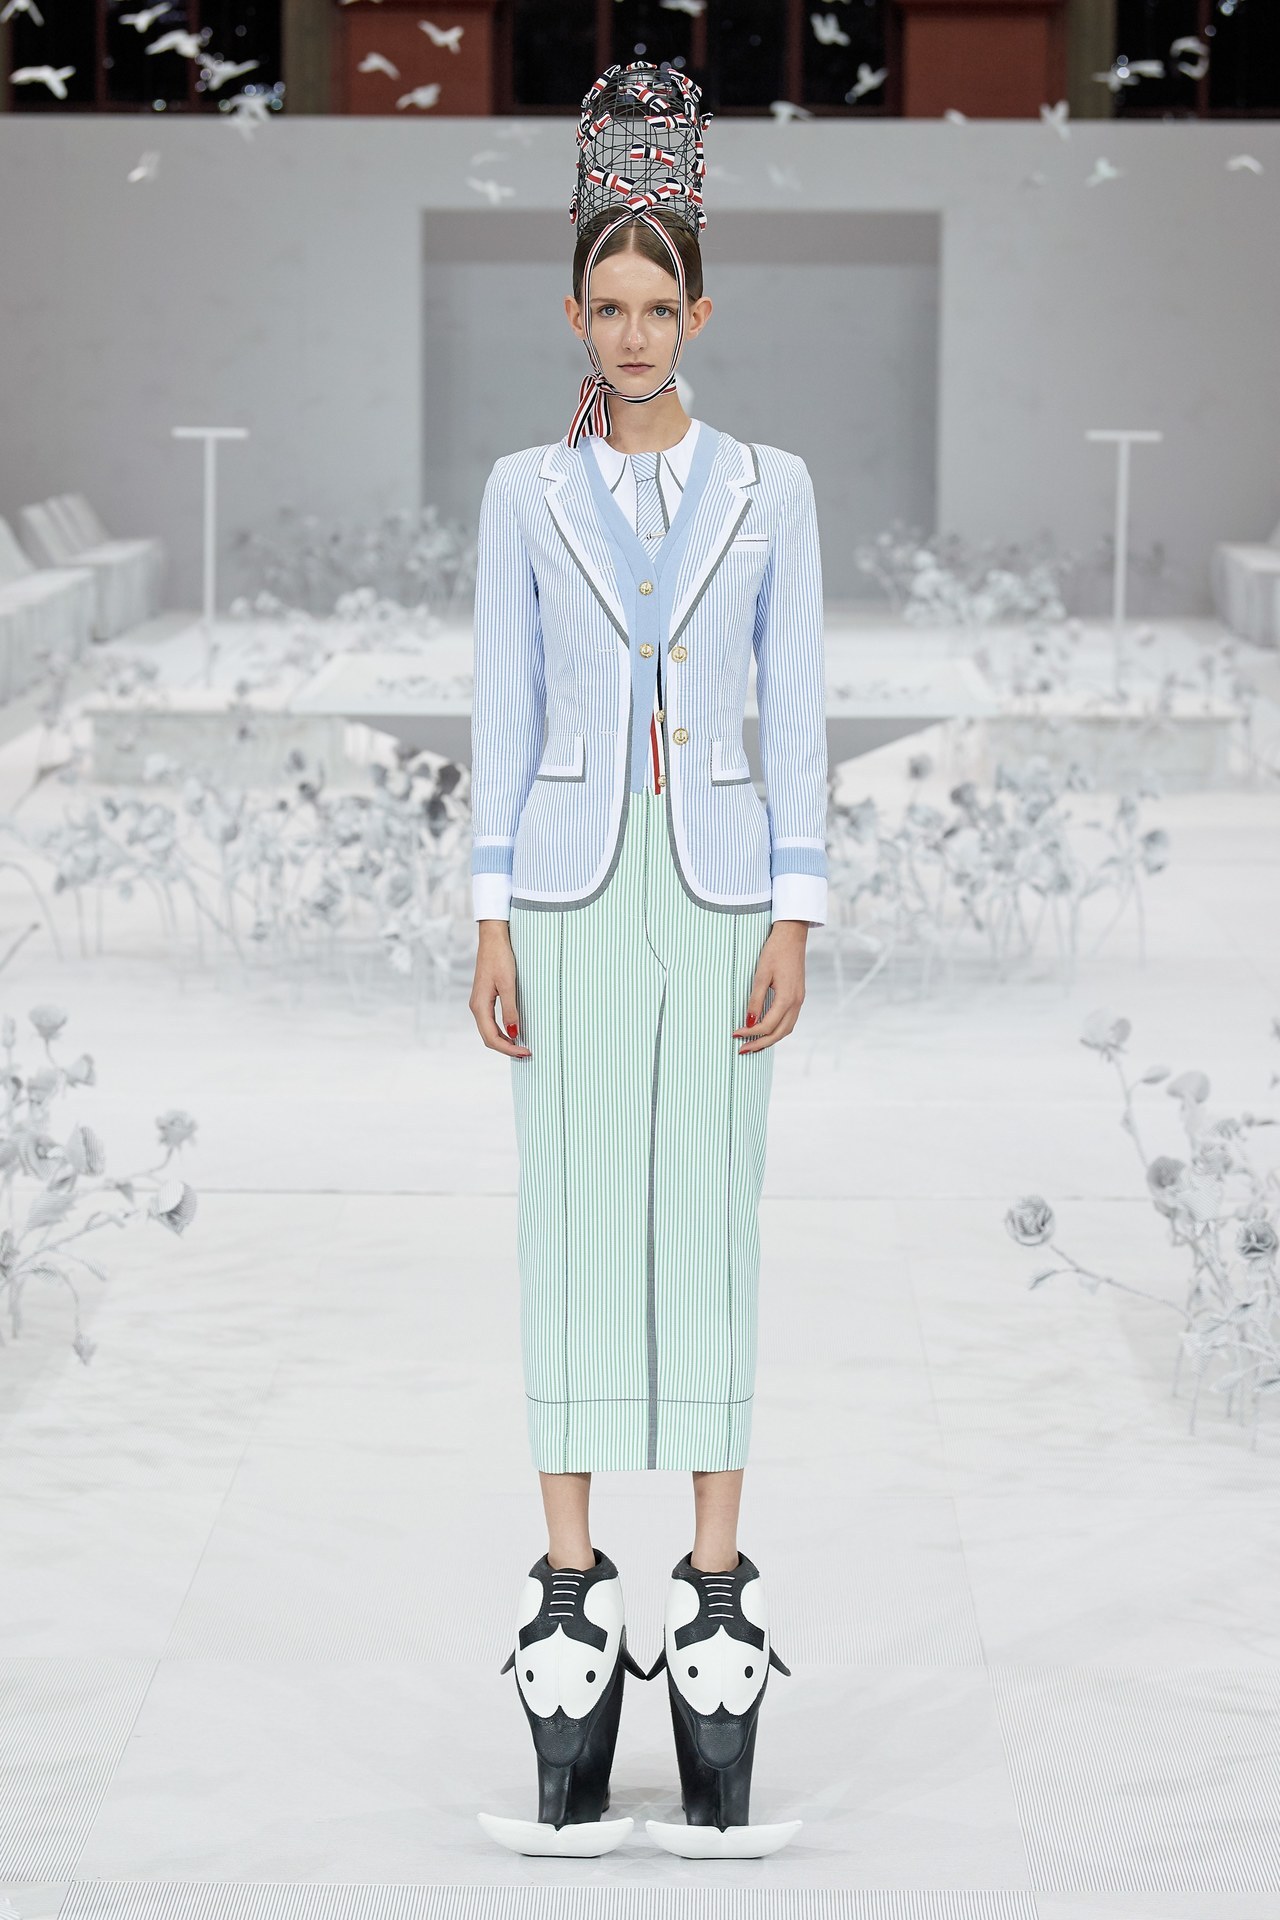 If I Were A Buyer : Thom Browne - Spring 2020